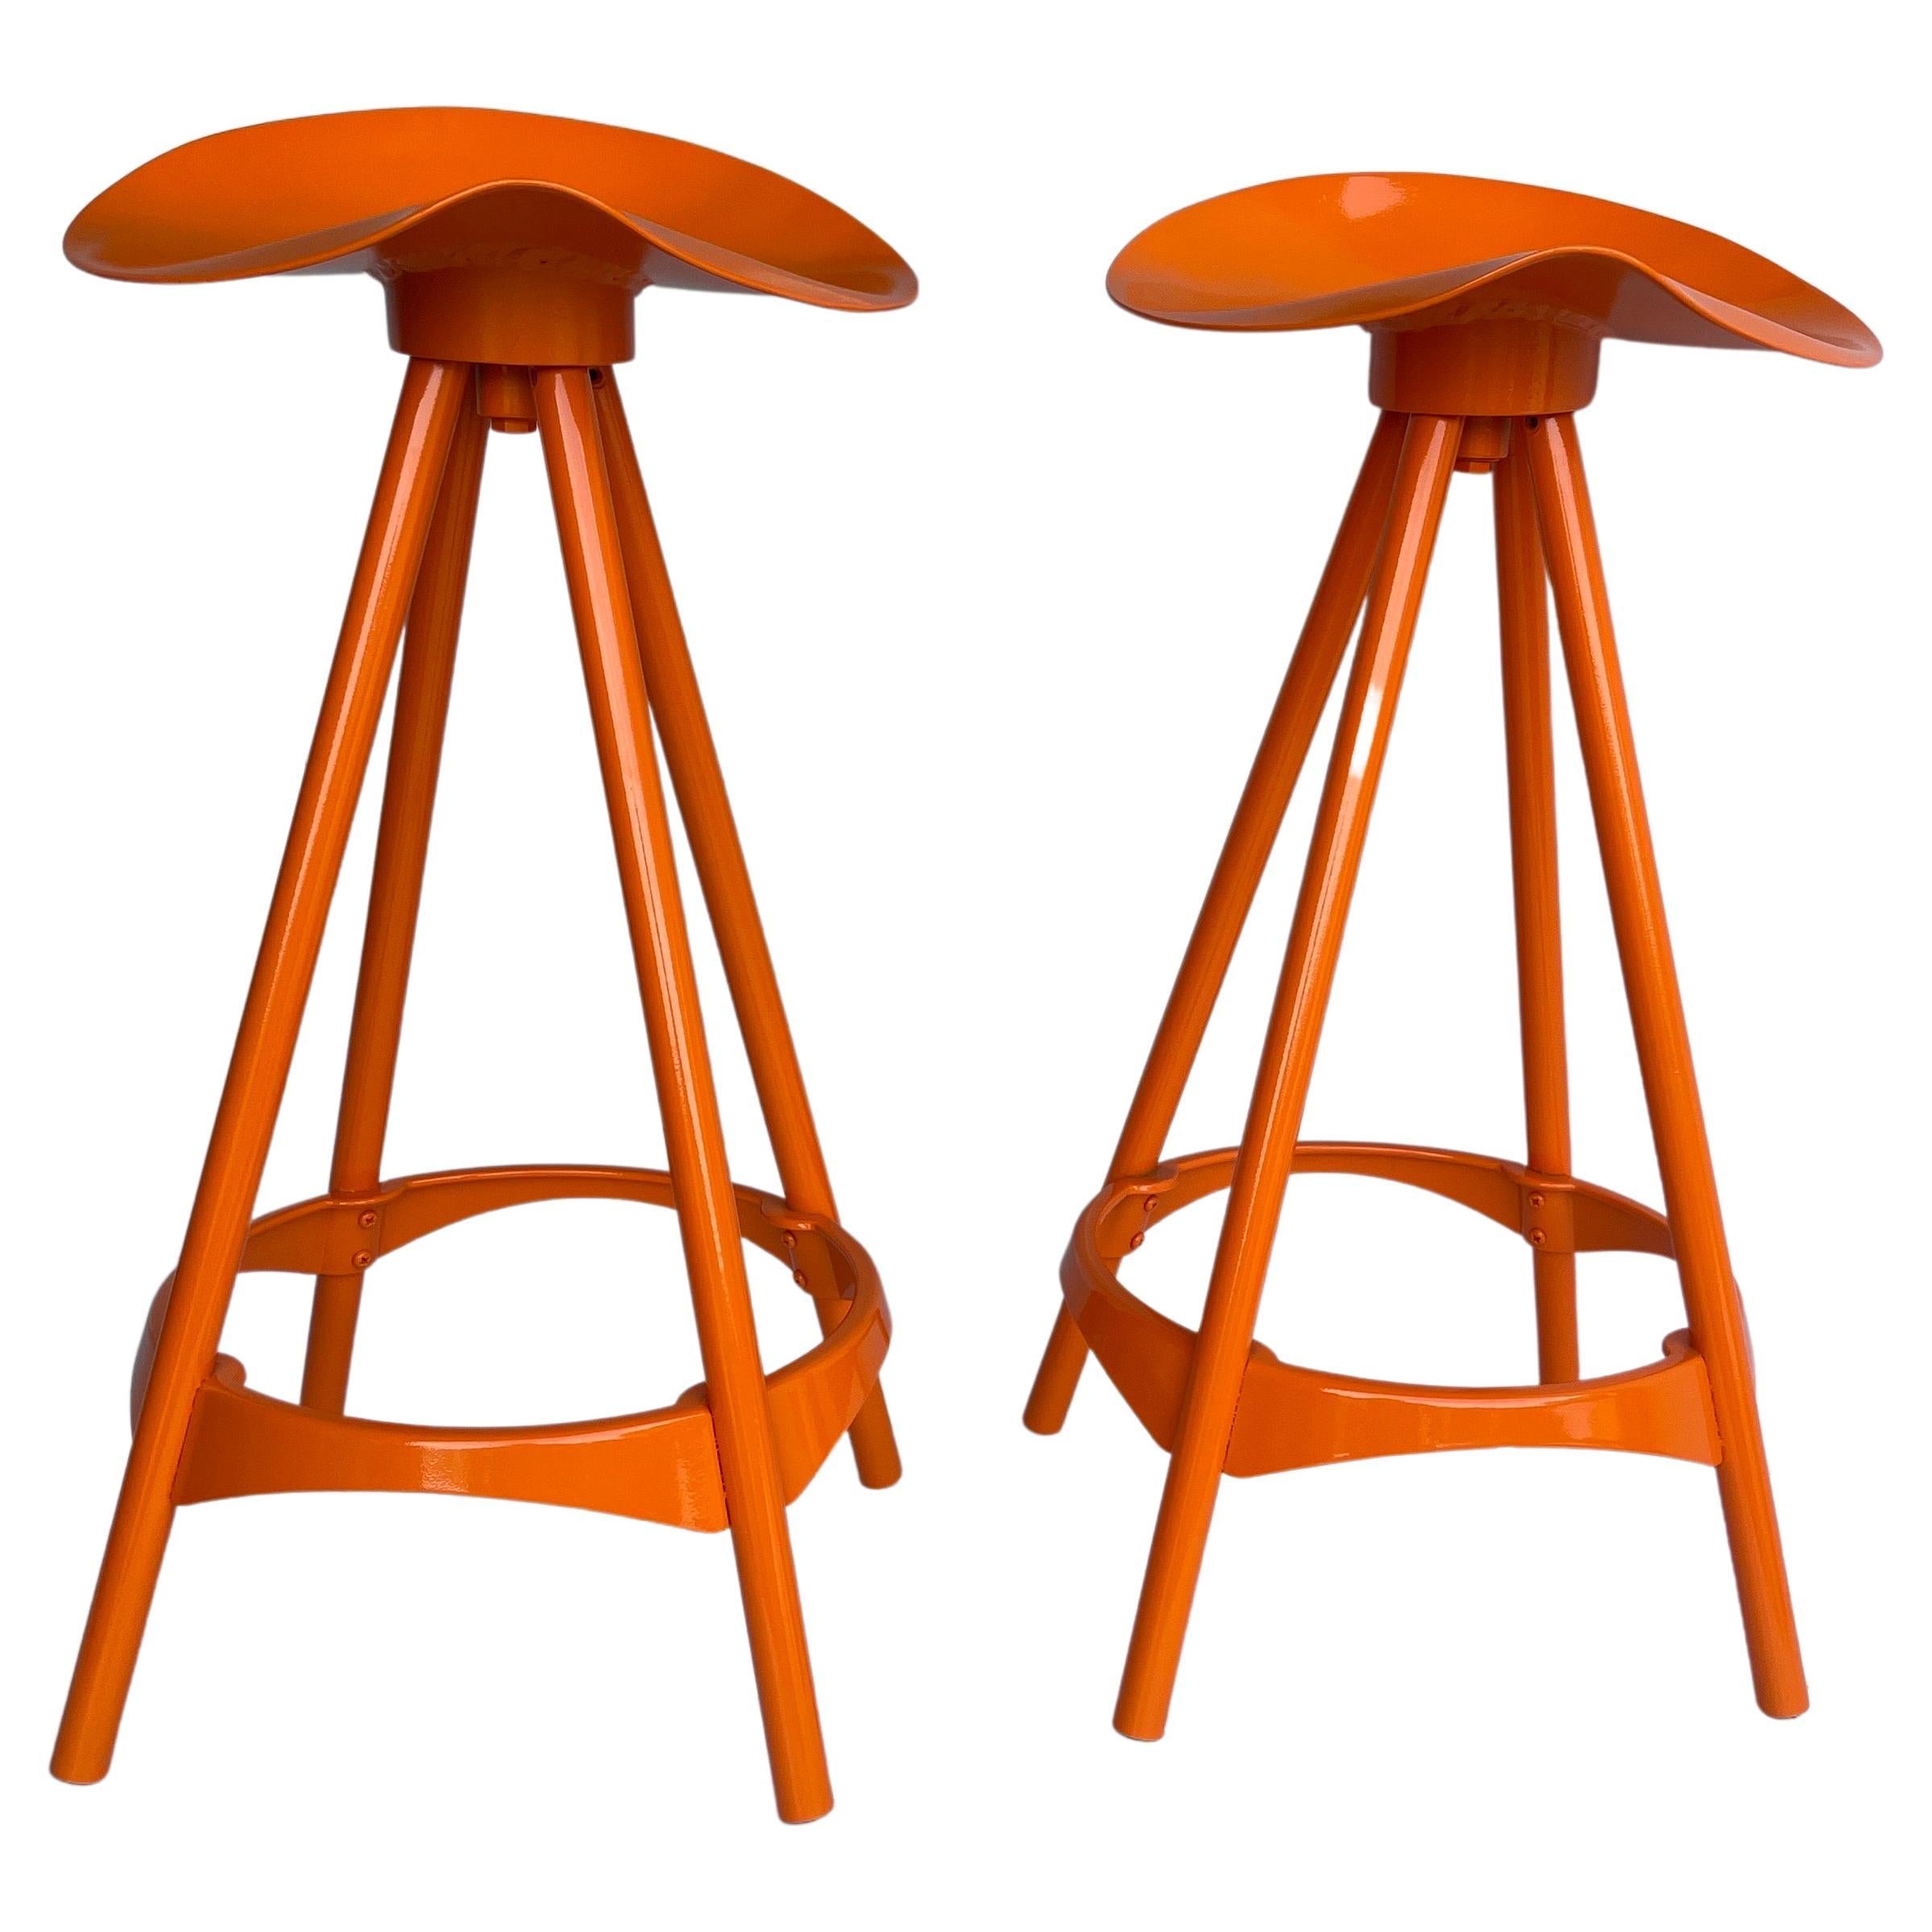 Industrial Style Swivel Bar Stools Powder-Coated Orange, A Pair

Newly painted stools that would be functional in many home settings with the Mid-Century vibe. This Hermes orange colored pair would be fantastic at a kitchen island as well as bar